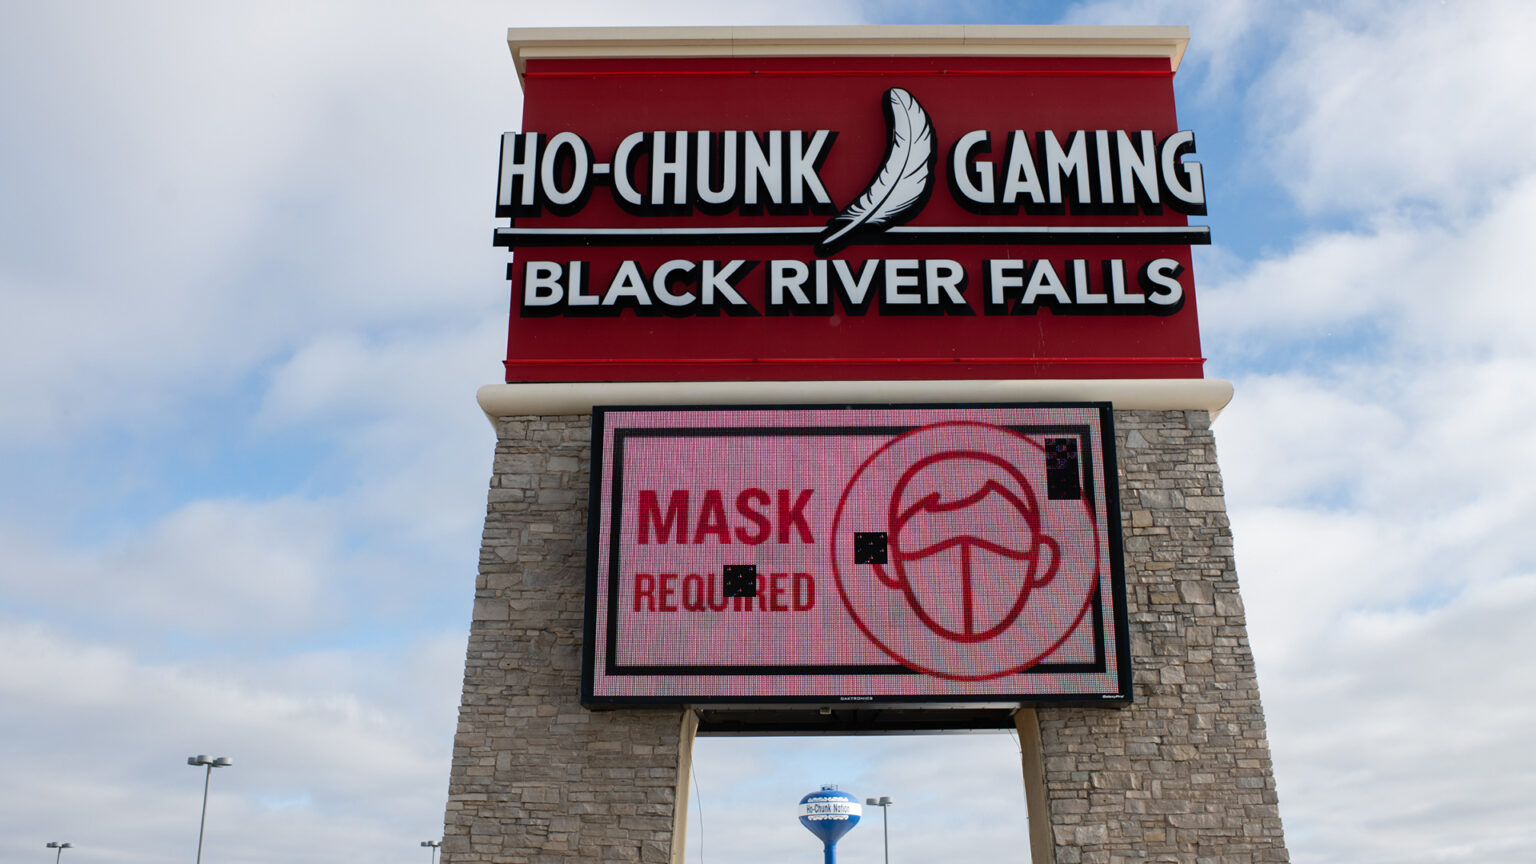 A large exterior sign for Ho-Chunk Gaming Black River Falls is situated above an electronic screen with an illustration of a face covered with a mask and the words Mask Required.